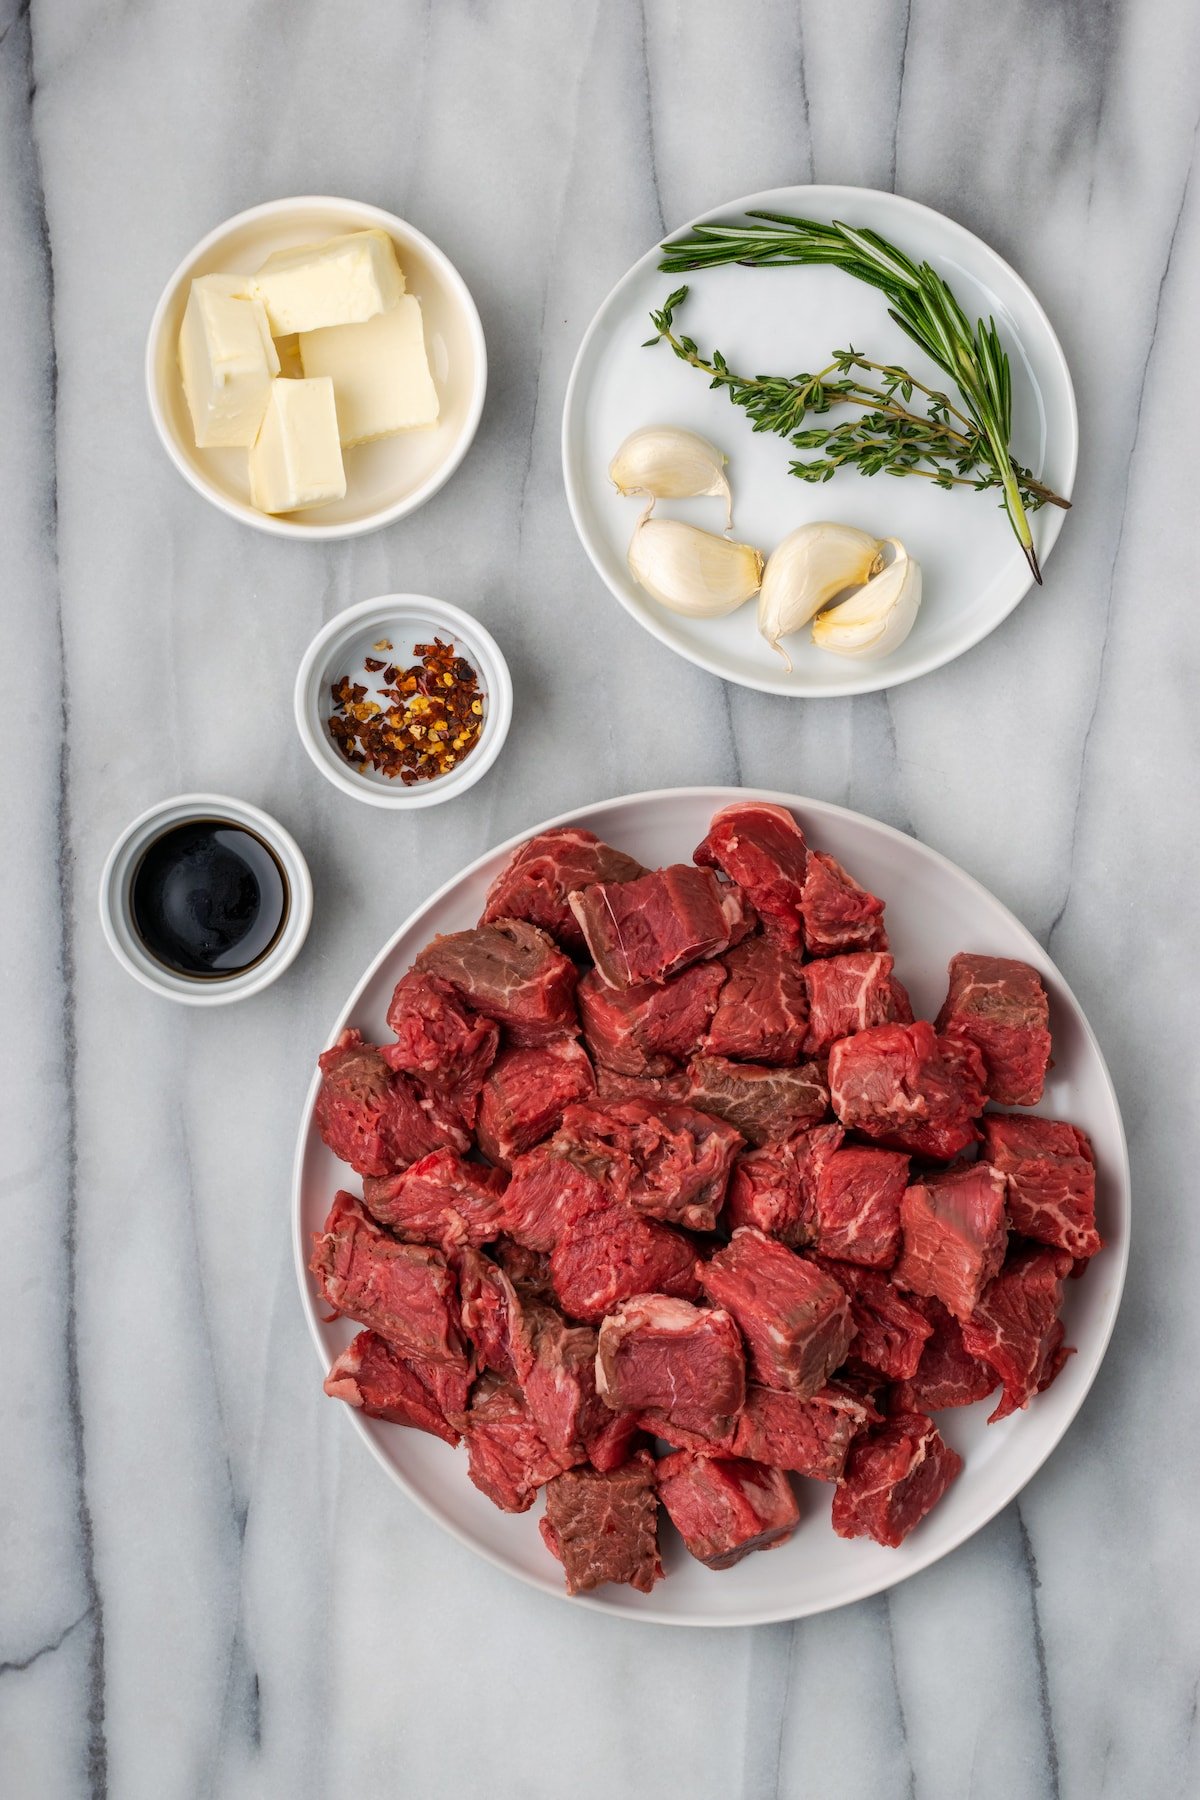 Overhead view of the ingredients needed for garlic butter steak bites: a plate of raw steak cubes, a bowl of butter, a bowl of soy sauce, a bowl of salt, pepper, and chili flakes, and a plate with garlic, fresh rosemary, and fresh thyme